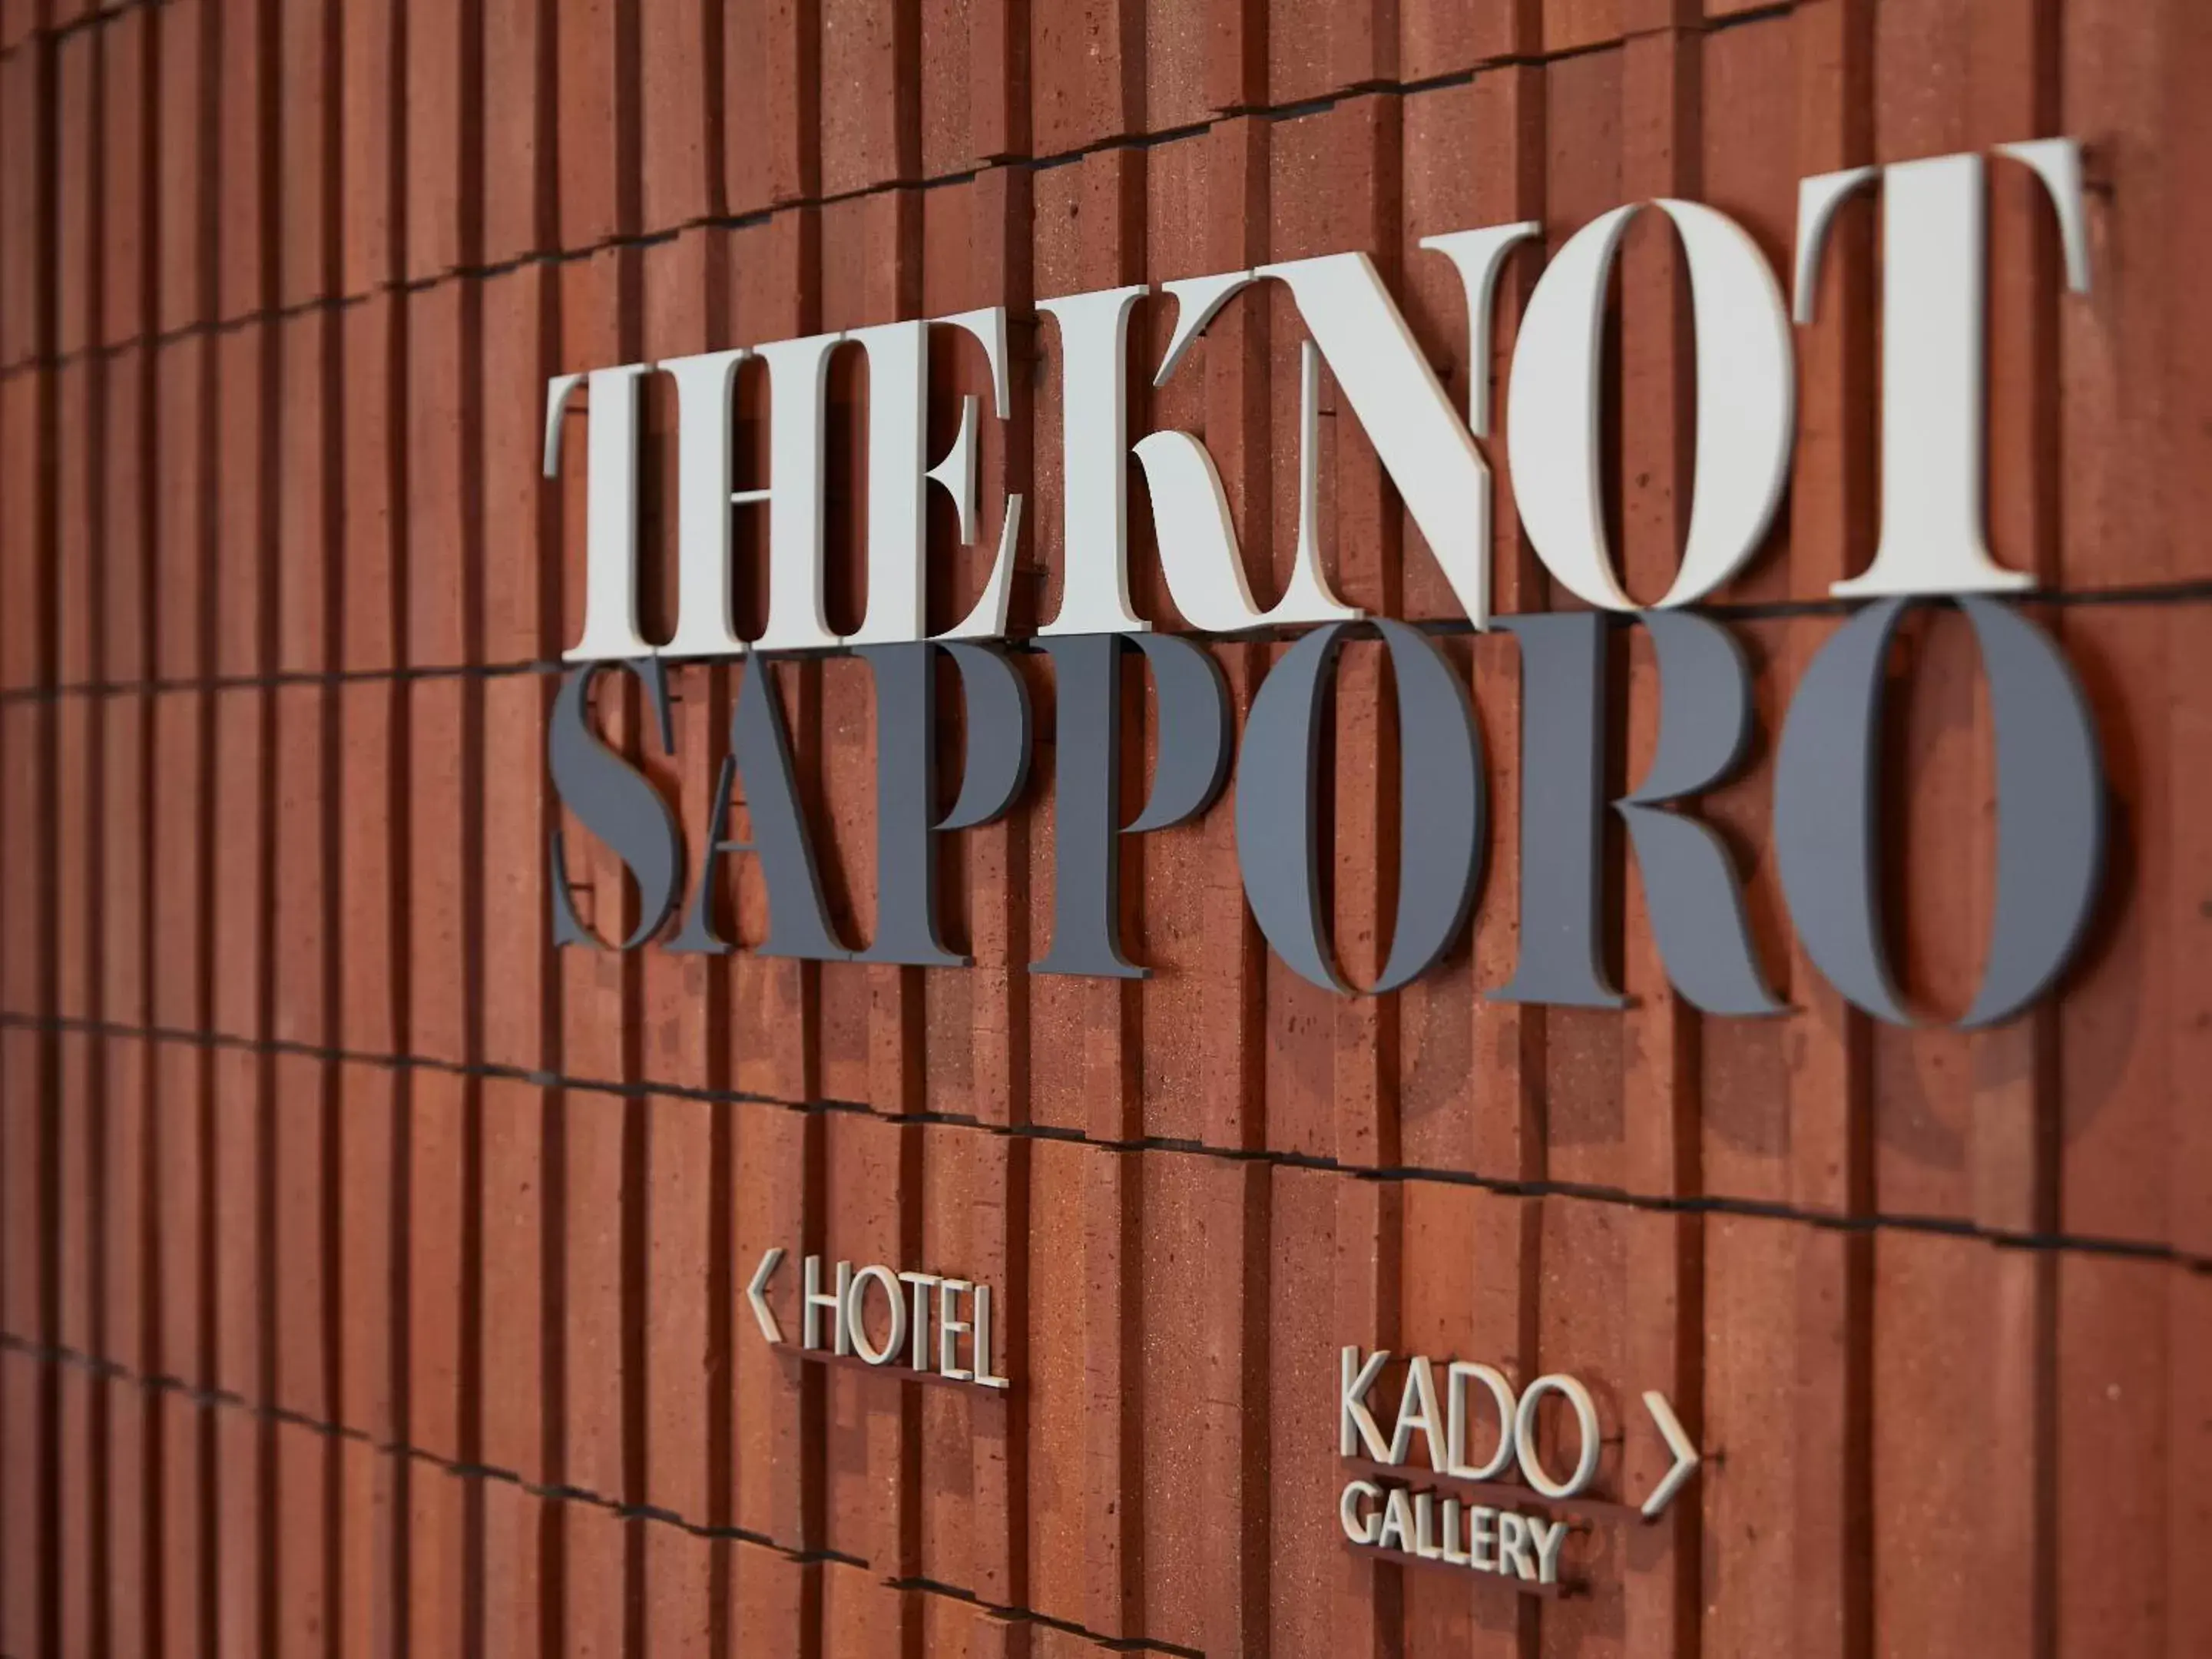 Property logo or sign in THE KNOT SAPPORO